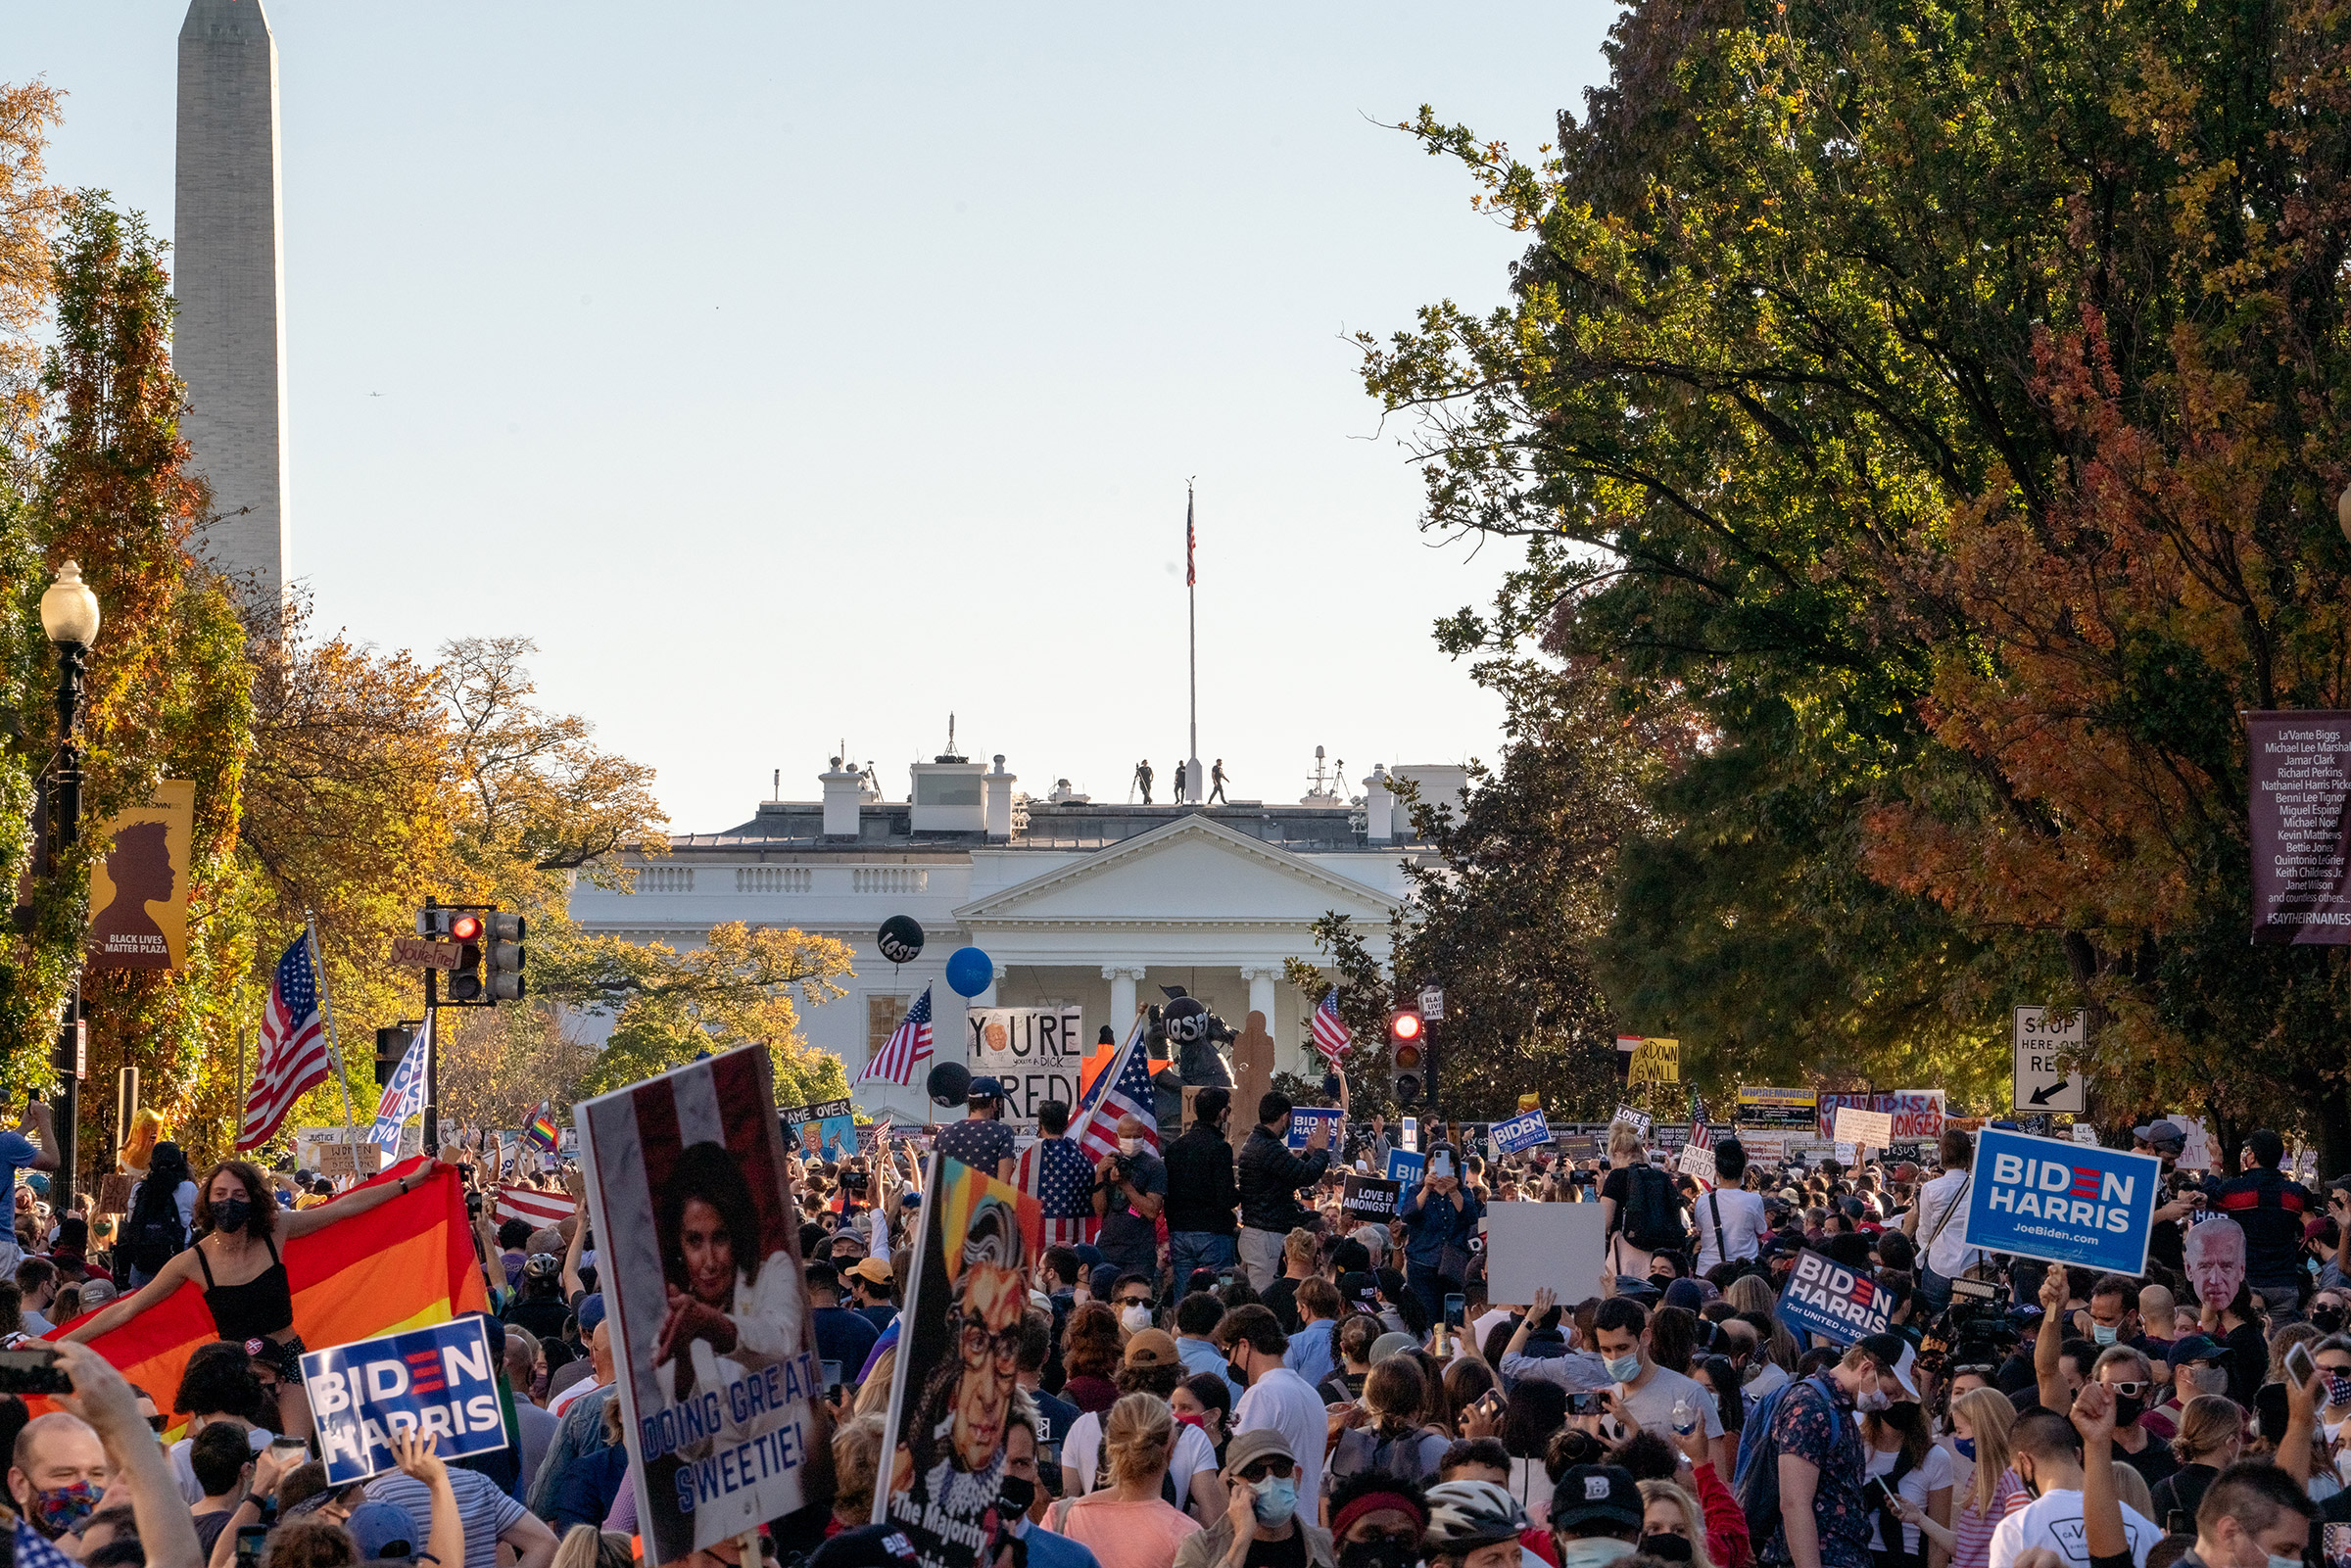 2020. Washington DC. USA. A massive crowd gathered near the White House to celebrate the election of Joe Biden as President of the United States after days of tense waiting for the election to be called, with razor thin margins in several states.